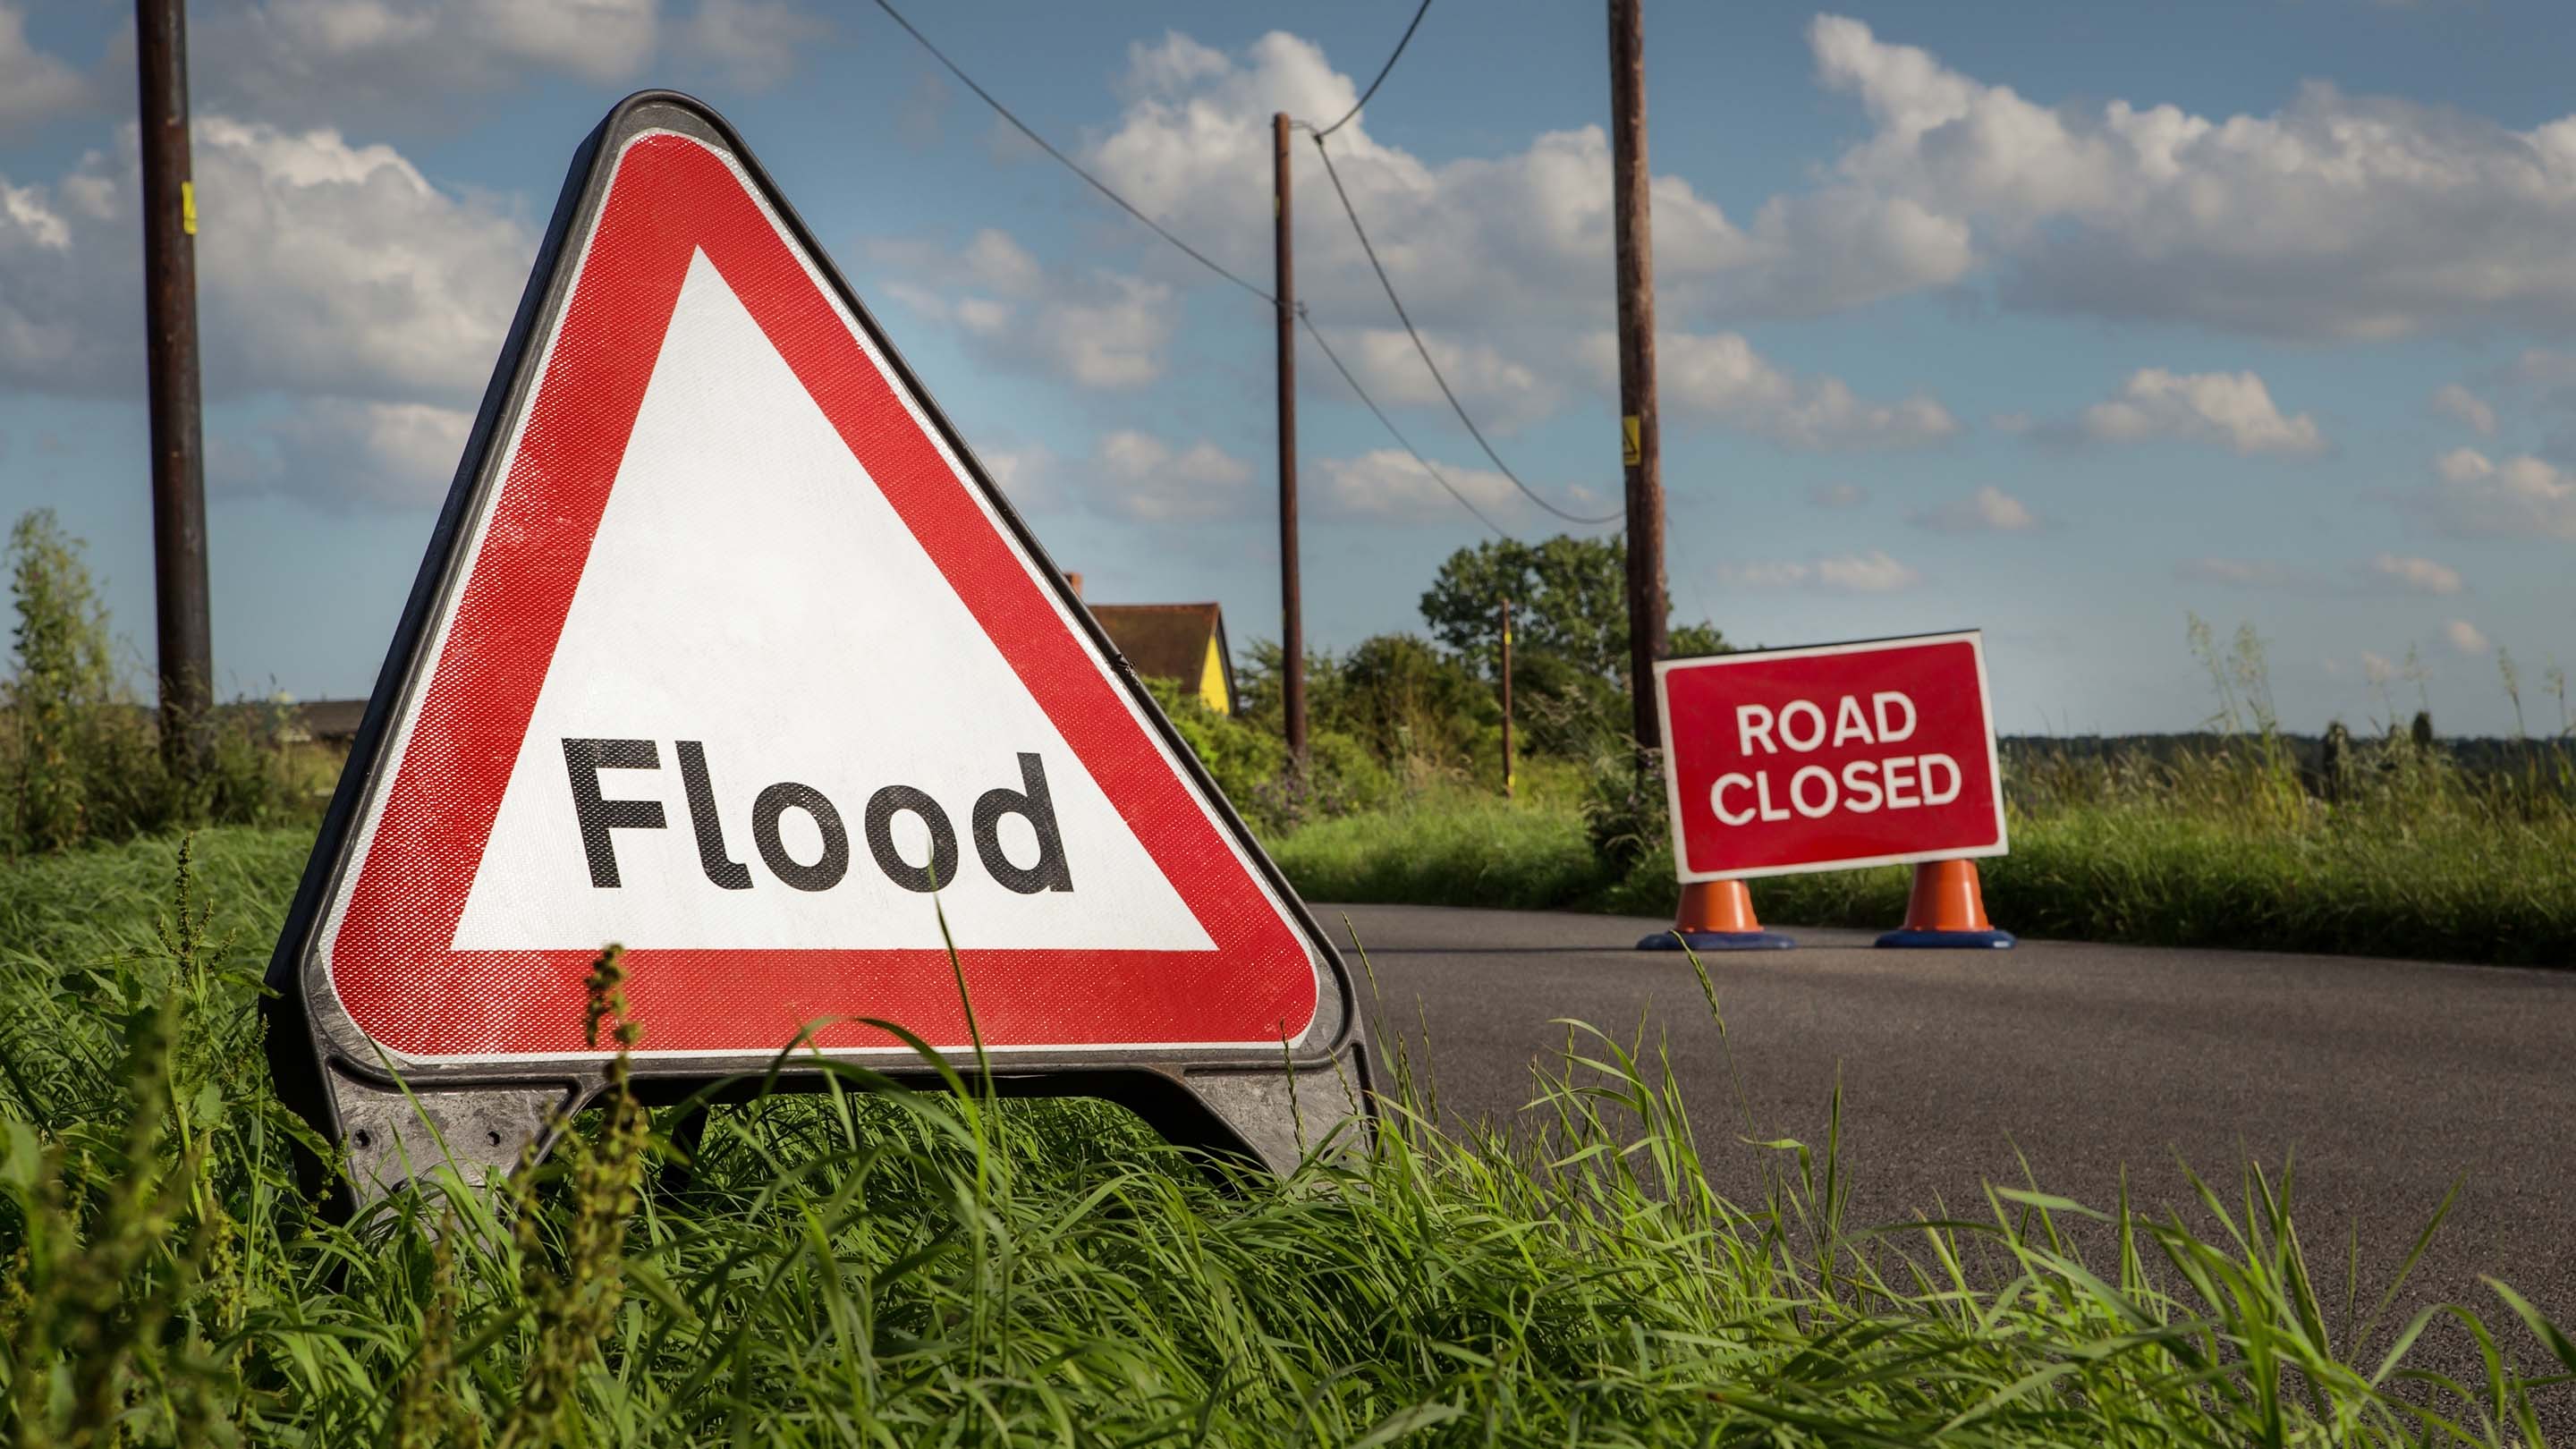 Flood warning sign on a road